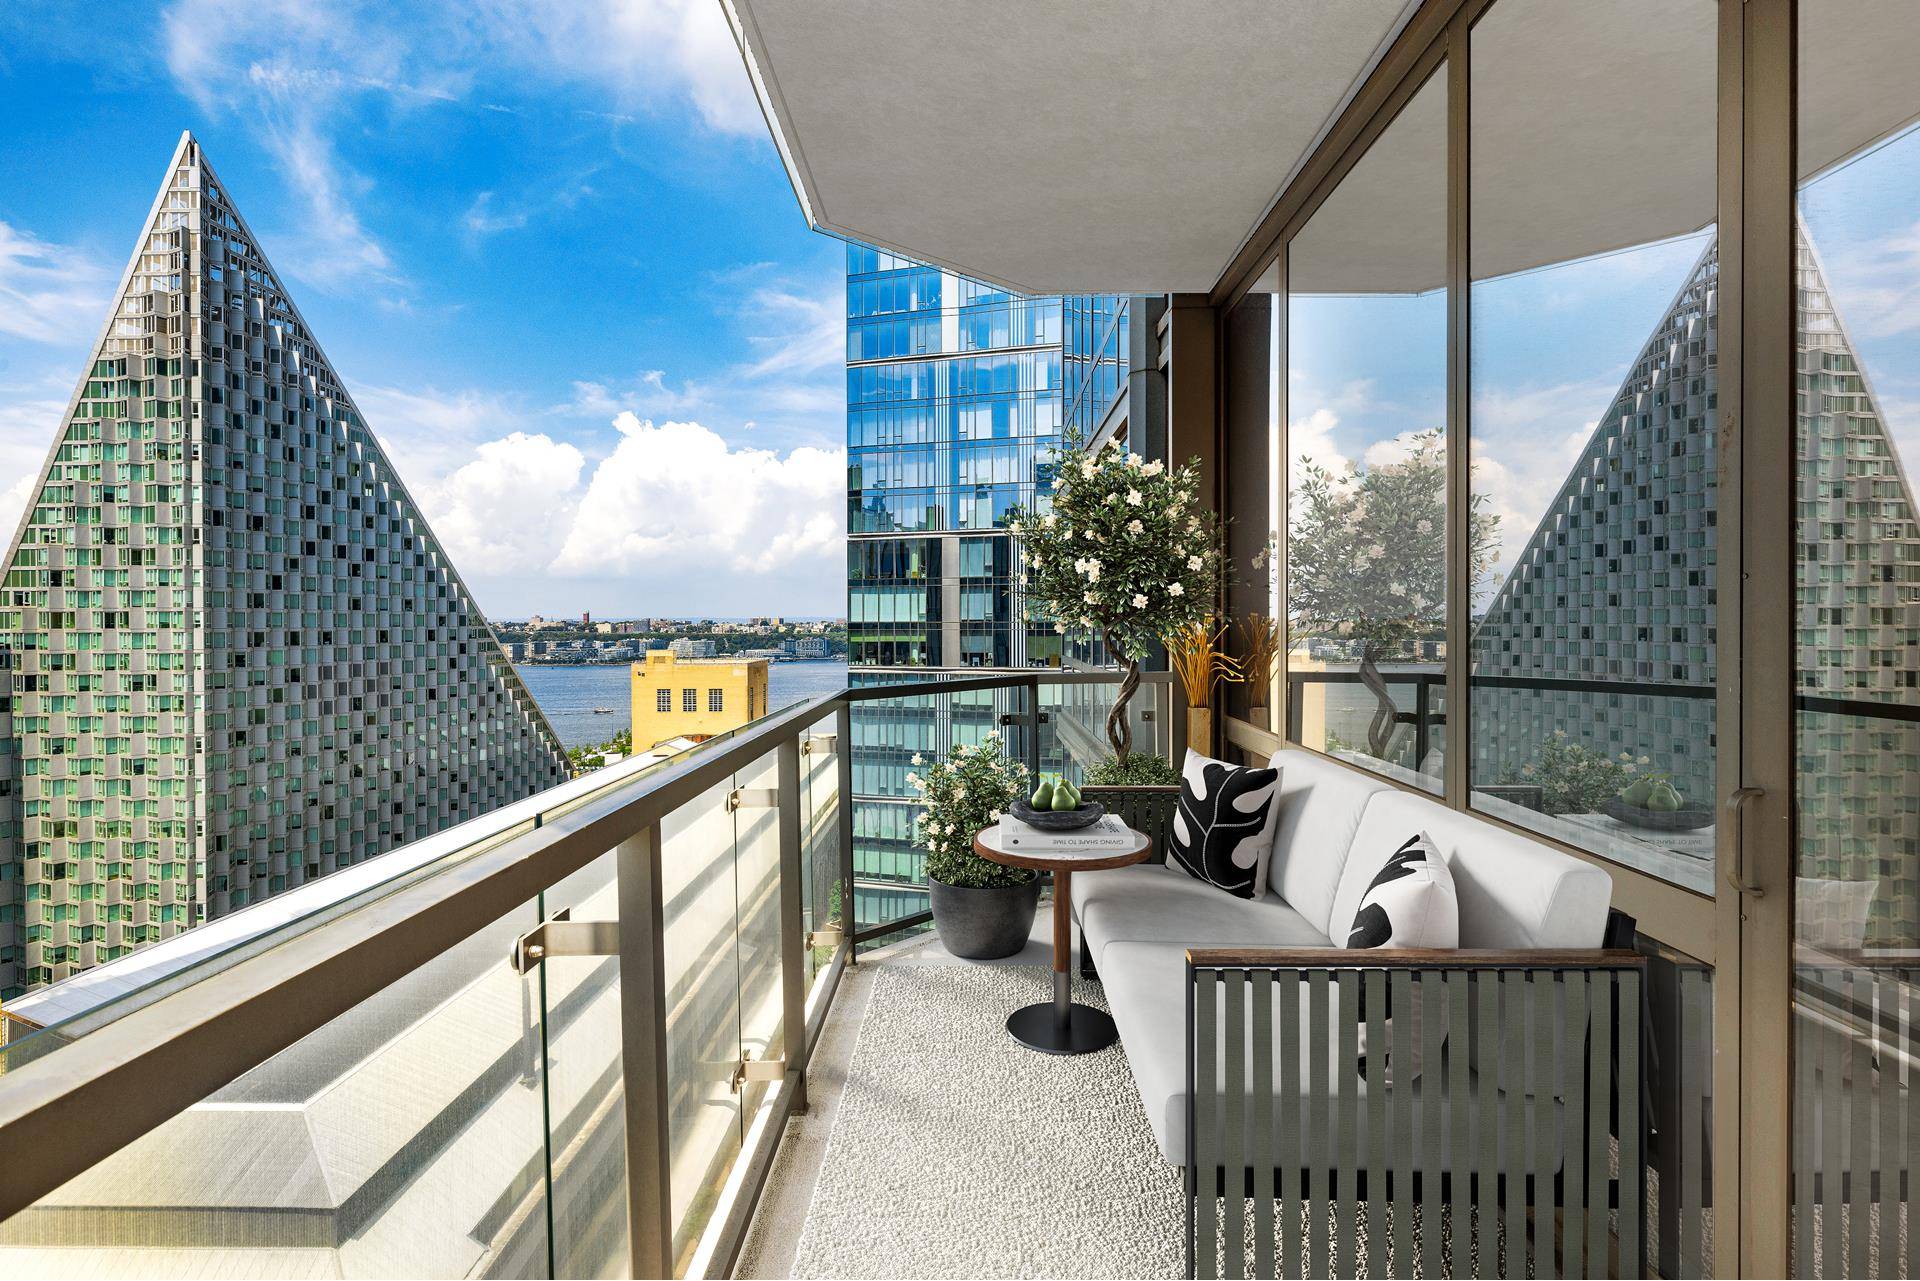 Introducing stunning sun drenched 2 bedroom, 2 bathroom corner apartment at 10 West End Avenue.